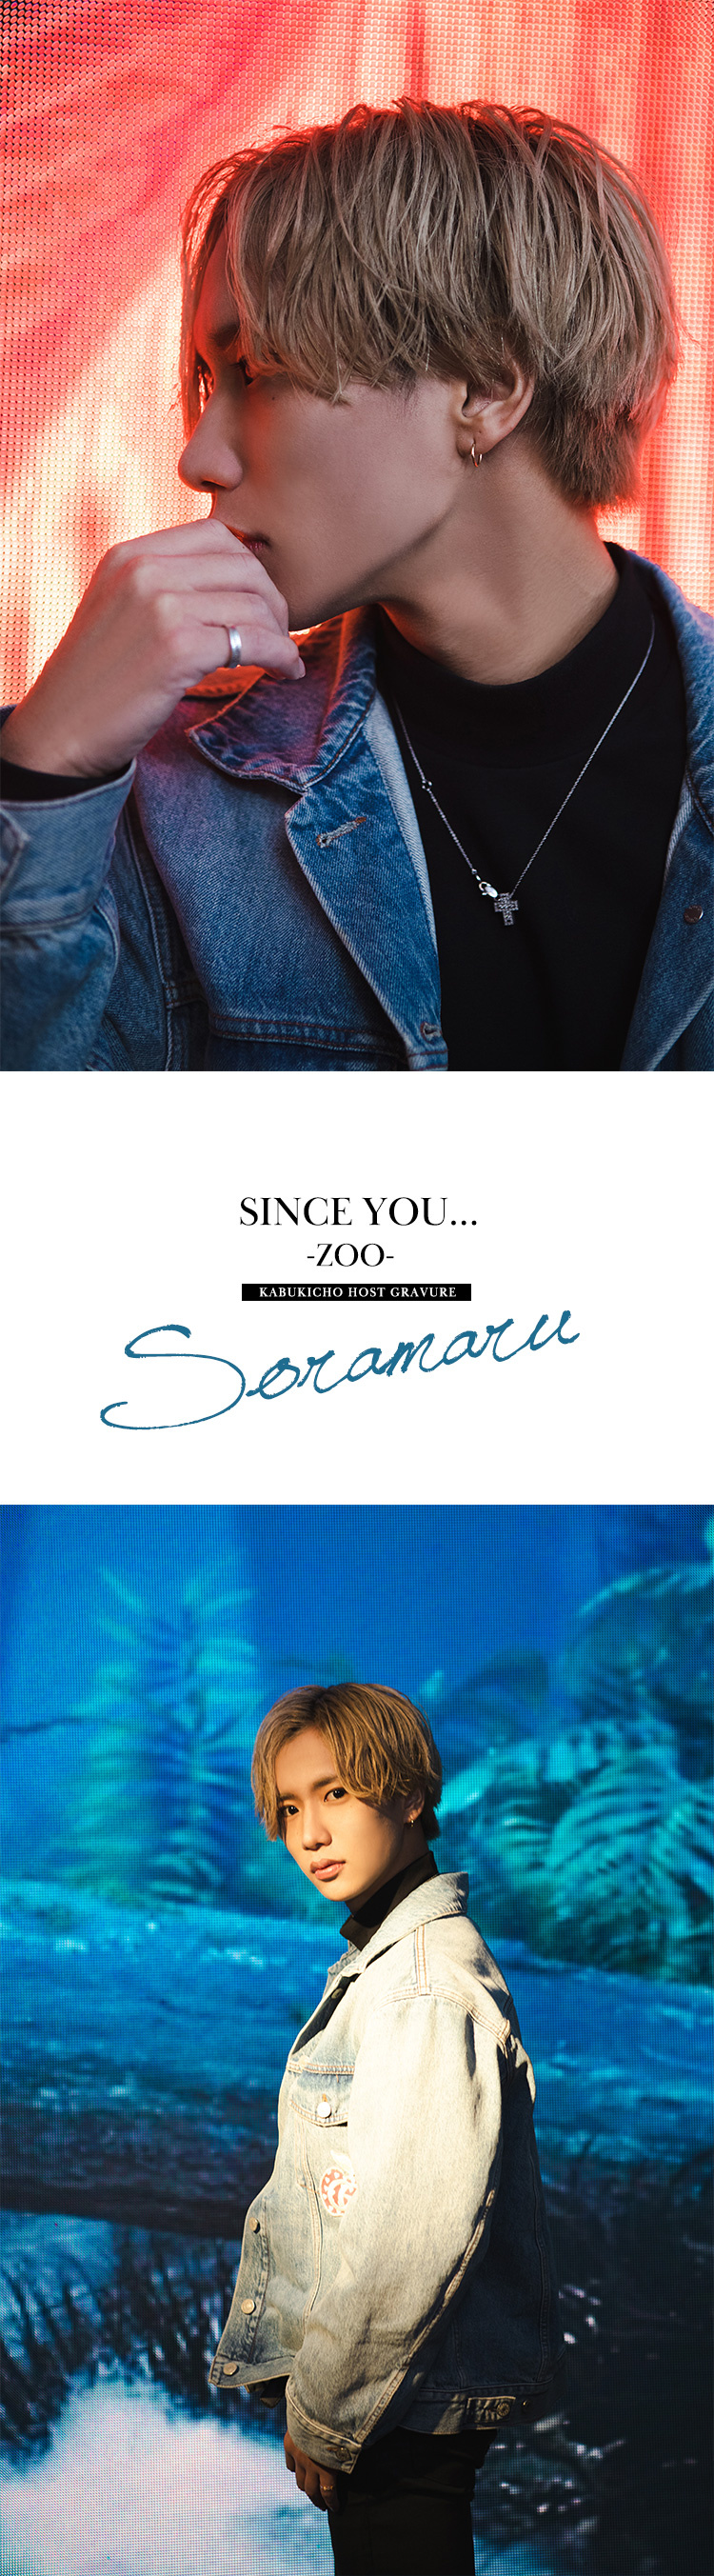 SINCE YOU GROUP「SINCE YOU... -ZOO-」から「そらまる主任」登場‼︎